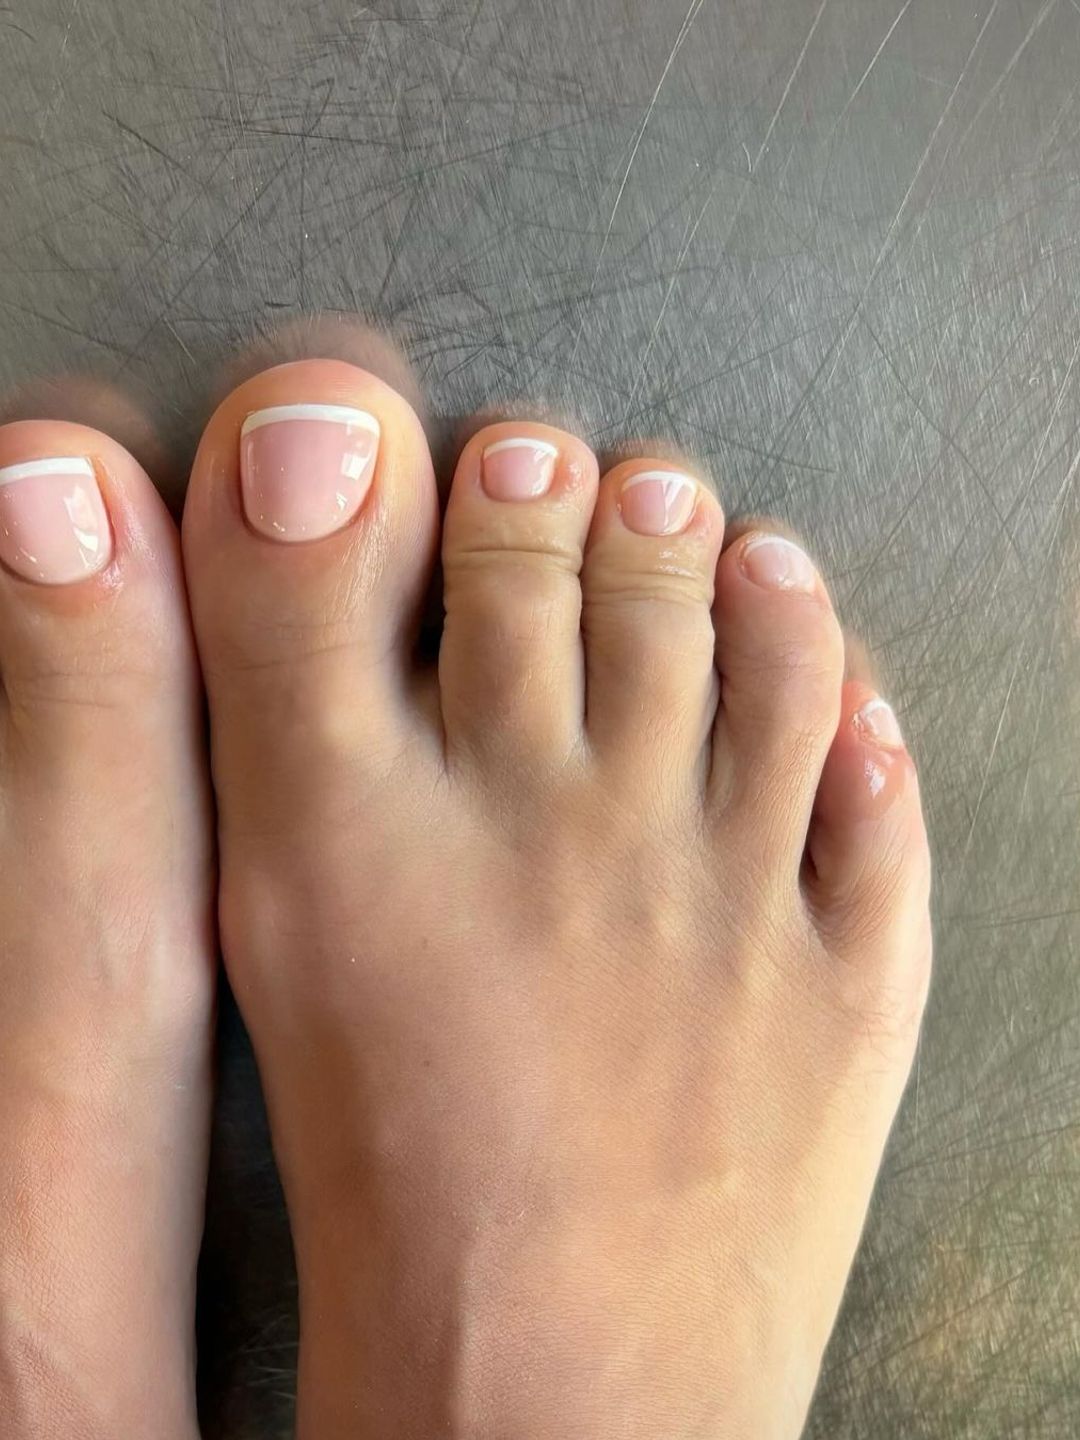 Harriet Westmorland shared a picture Lily Allen's perfect pedi 